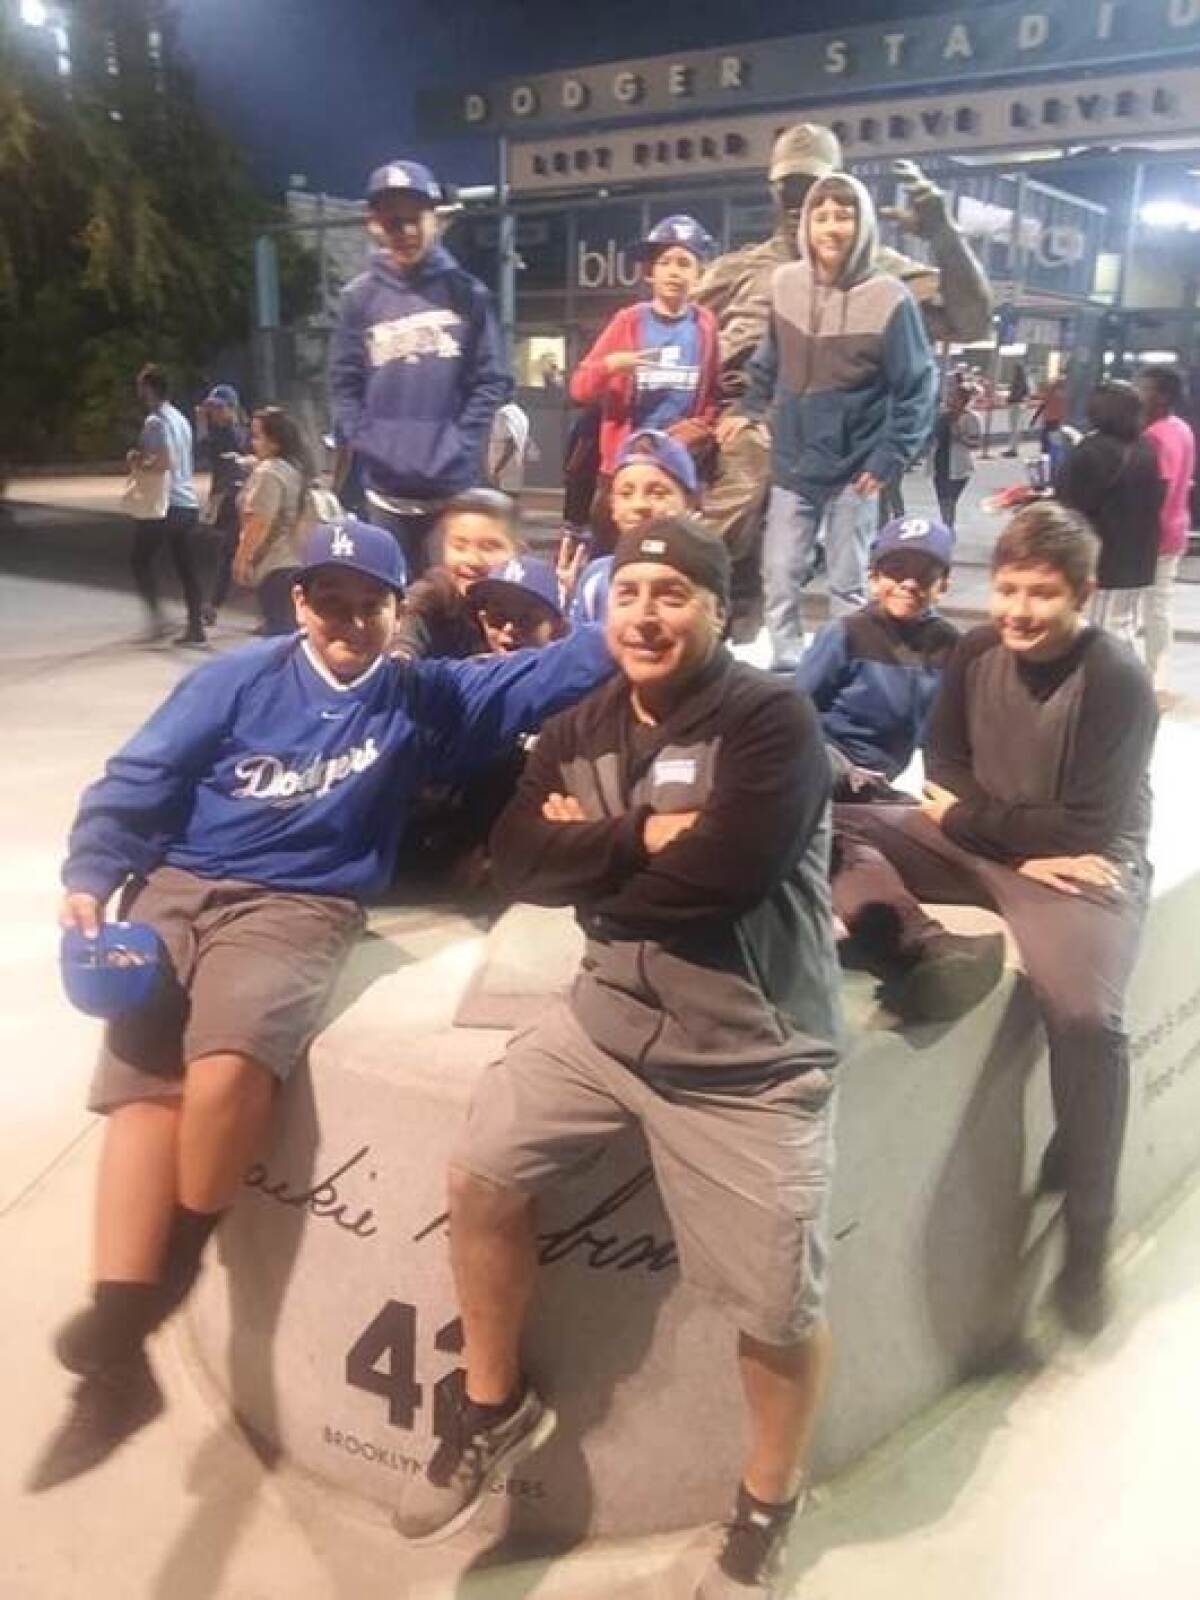 A group photo outside the gates of Dodger Stadium